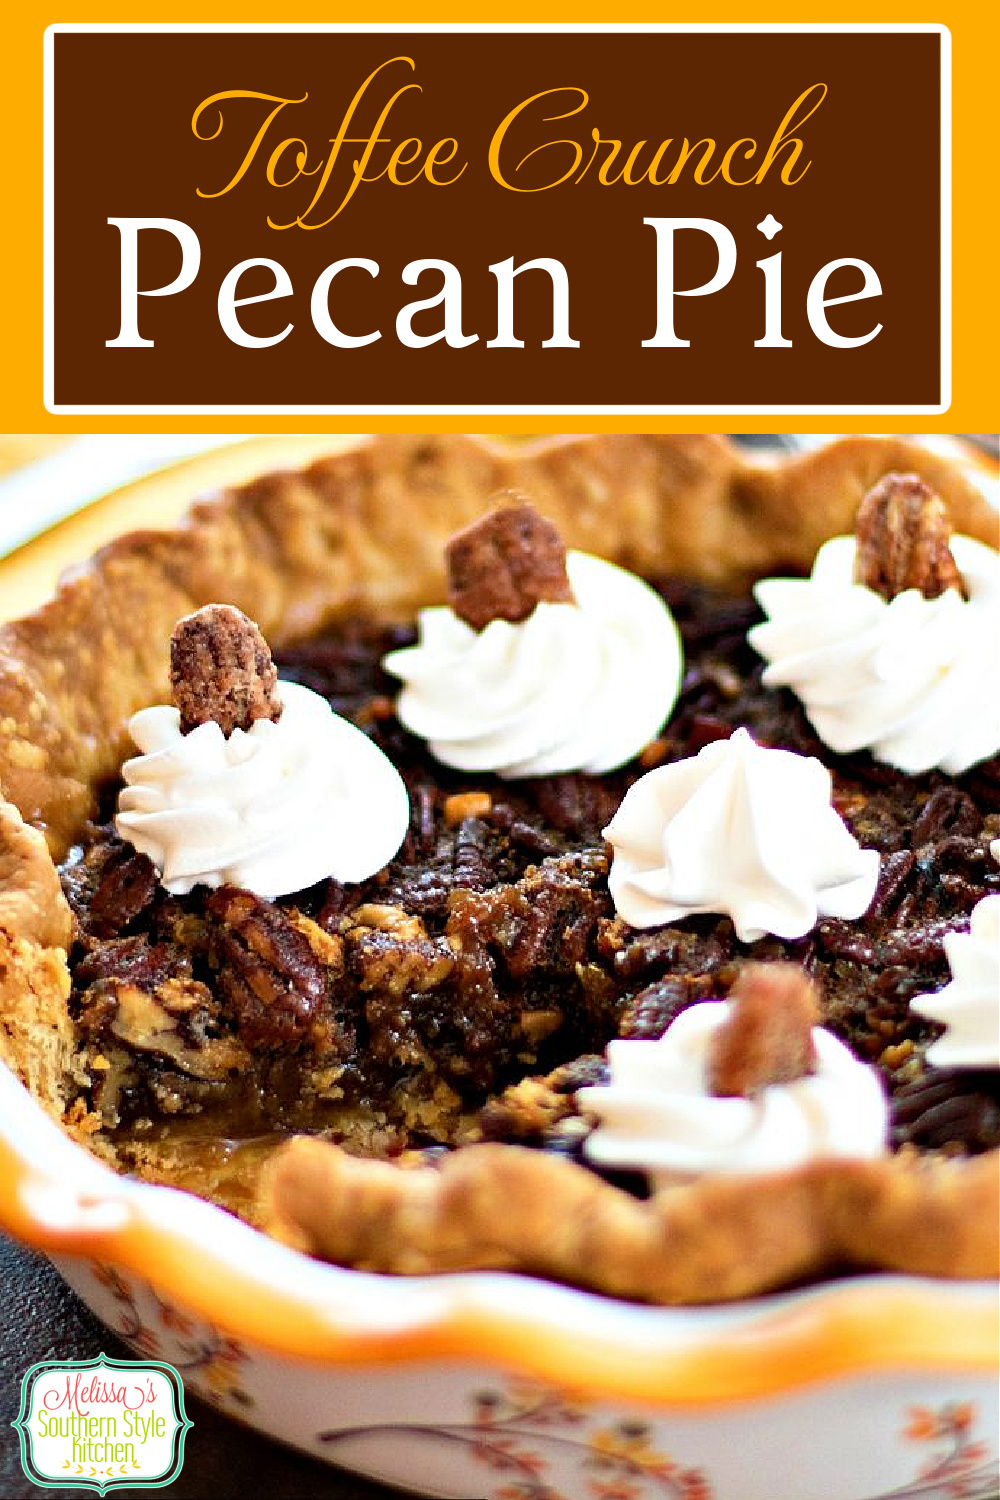 This Toffee Crunch Pecan Pie with Chantilly Cream is a tasty twist on classic Southern pecan pie #pecanpierecipes #pecanpie #toffeecrunchpie #toffeepecanpie #pies #thanksgivingpierecipes #desserts #pecans #holidayrecipes #pie #pecanrecipes via @melissasssk